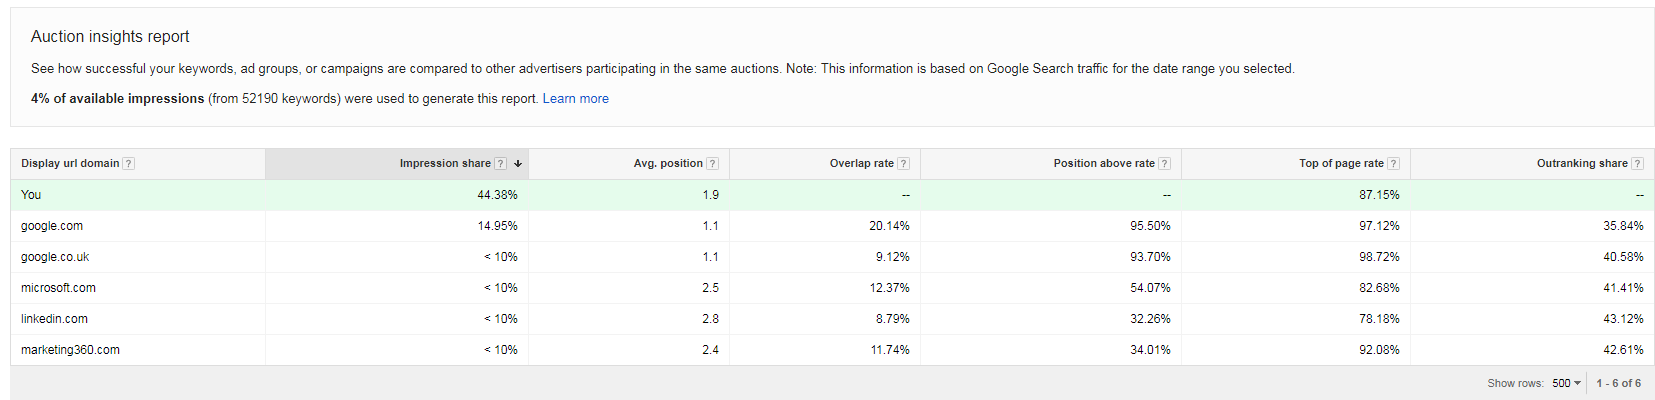 Ways to find competitor keywords Google AdWords Auction Insights results